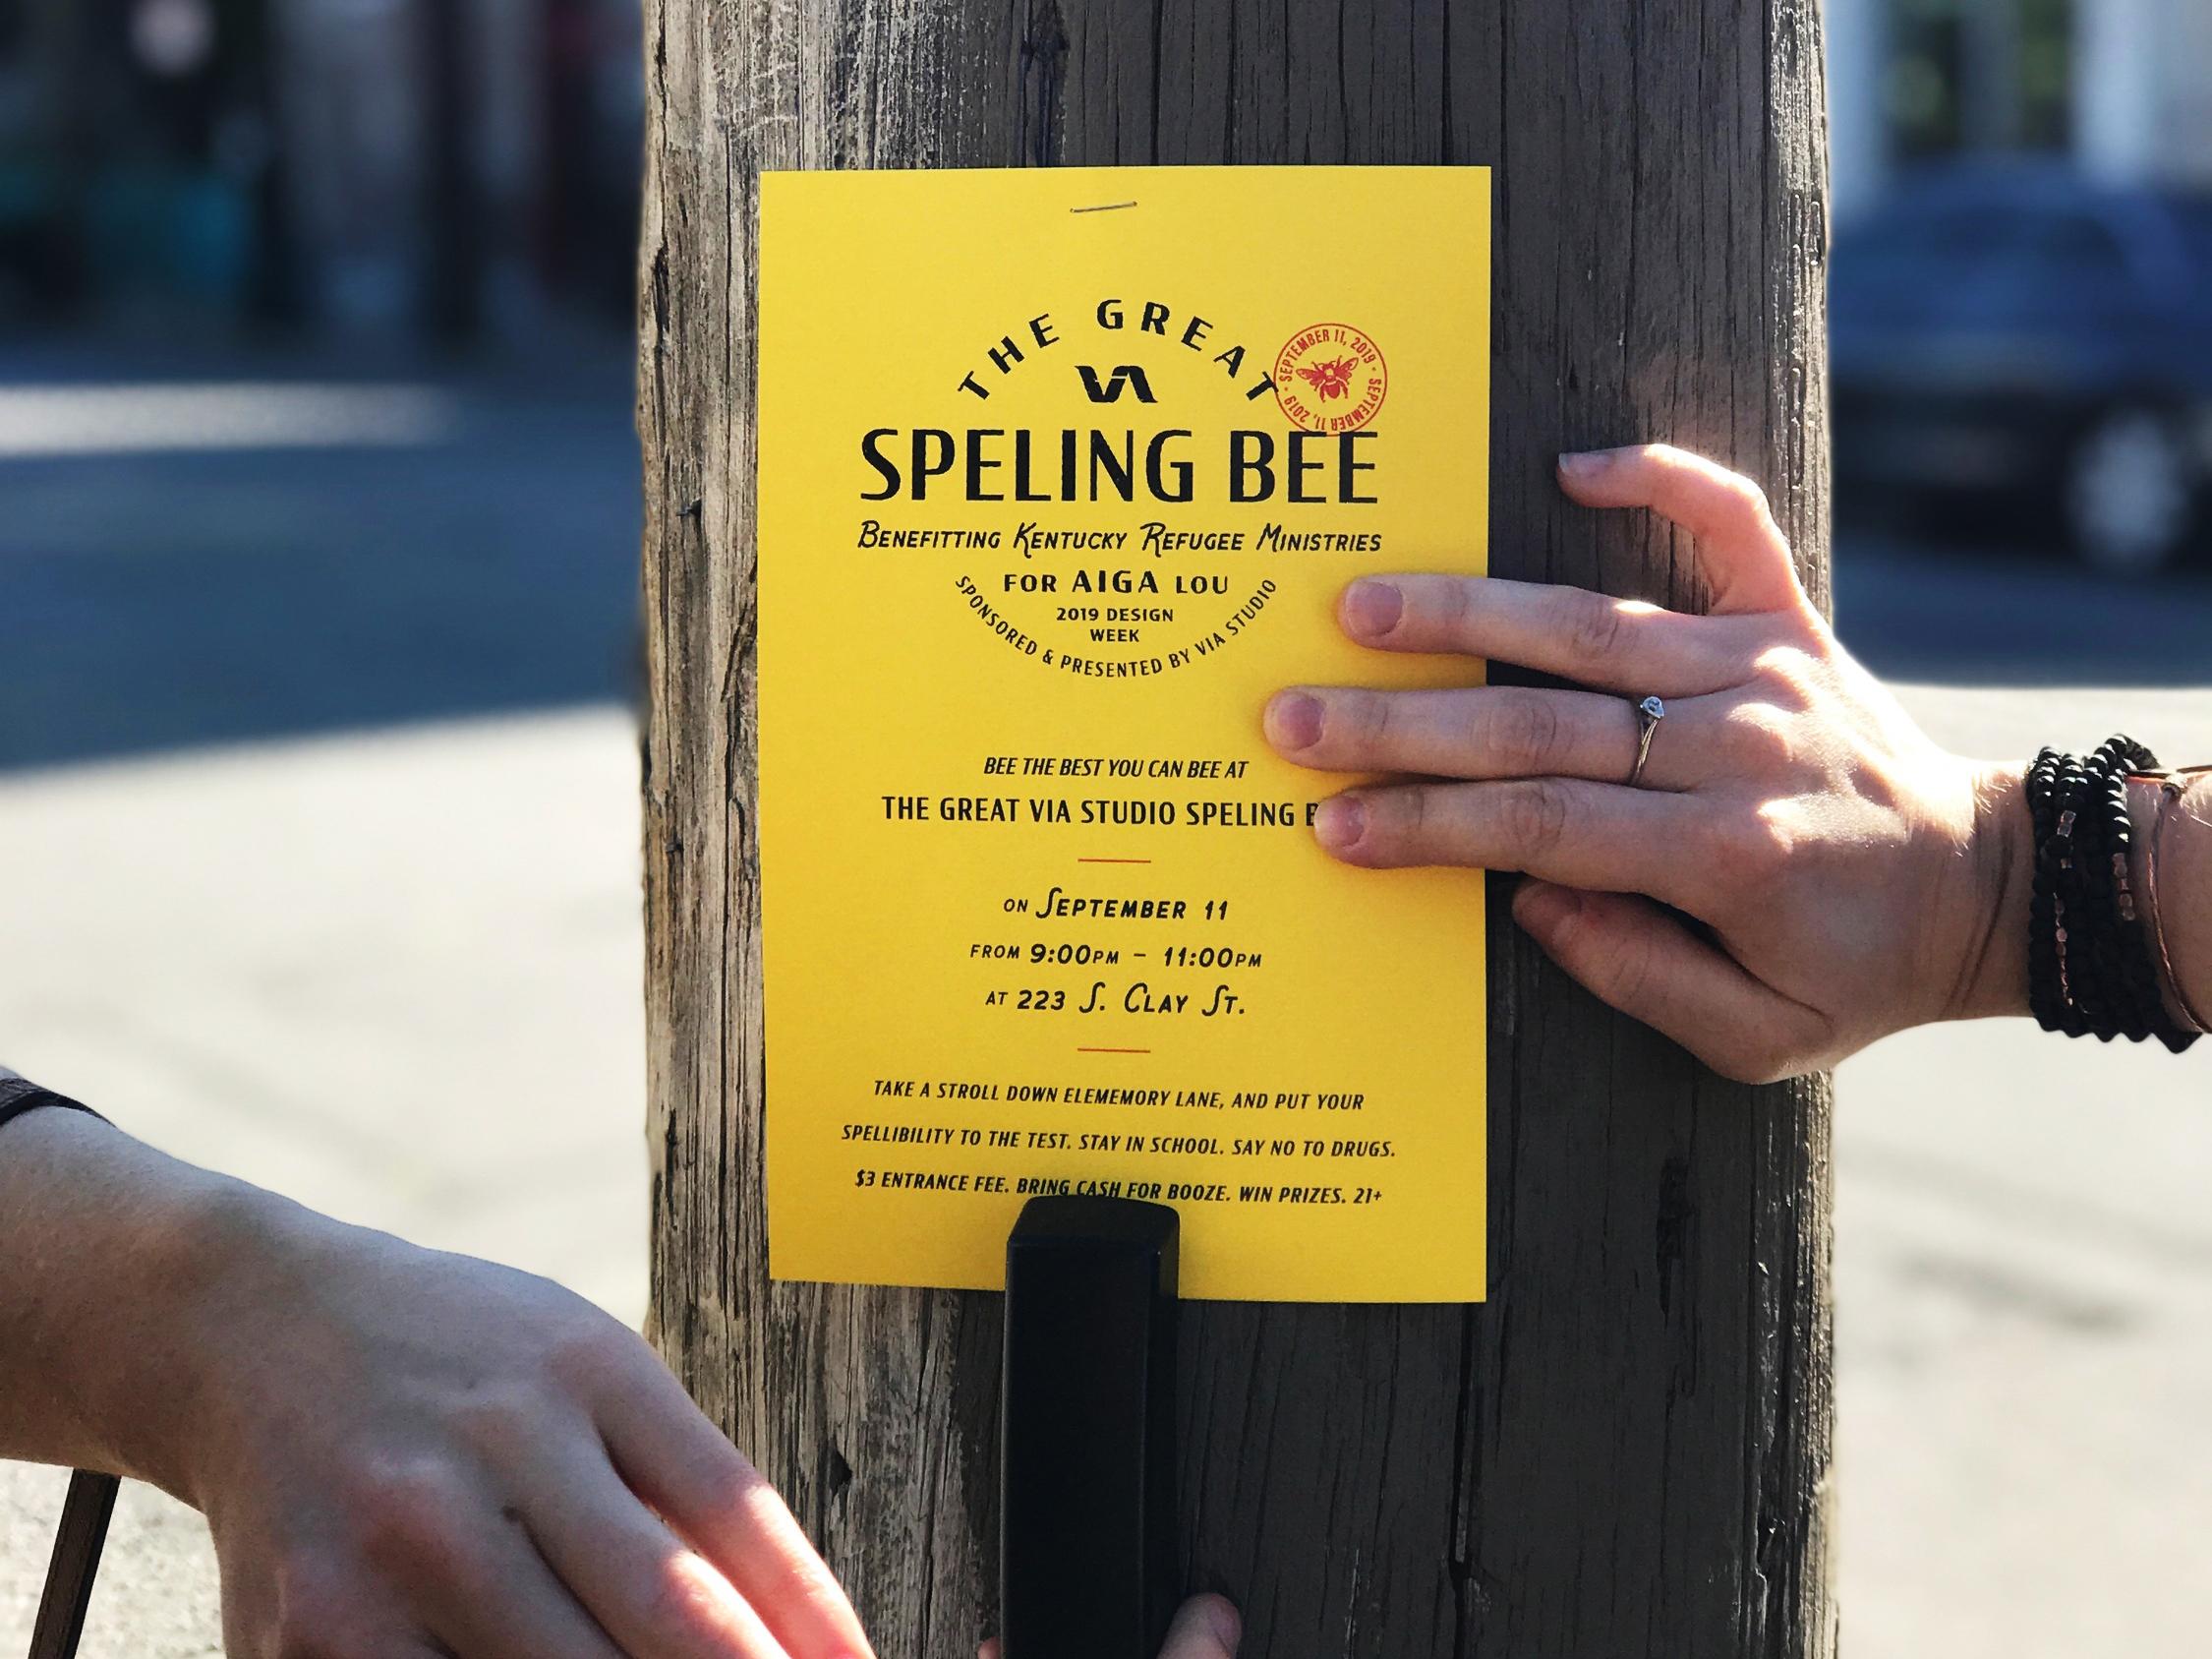 Spelling Bee event poster.